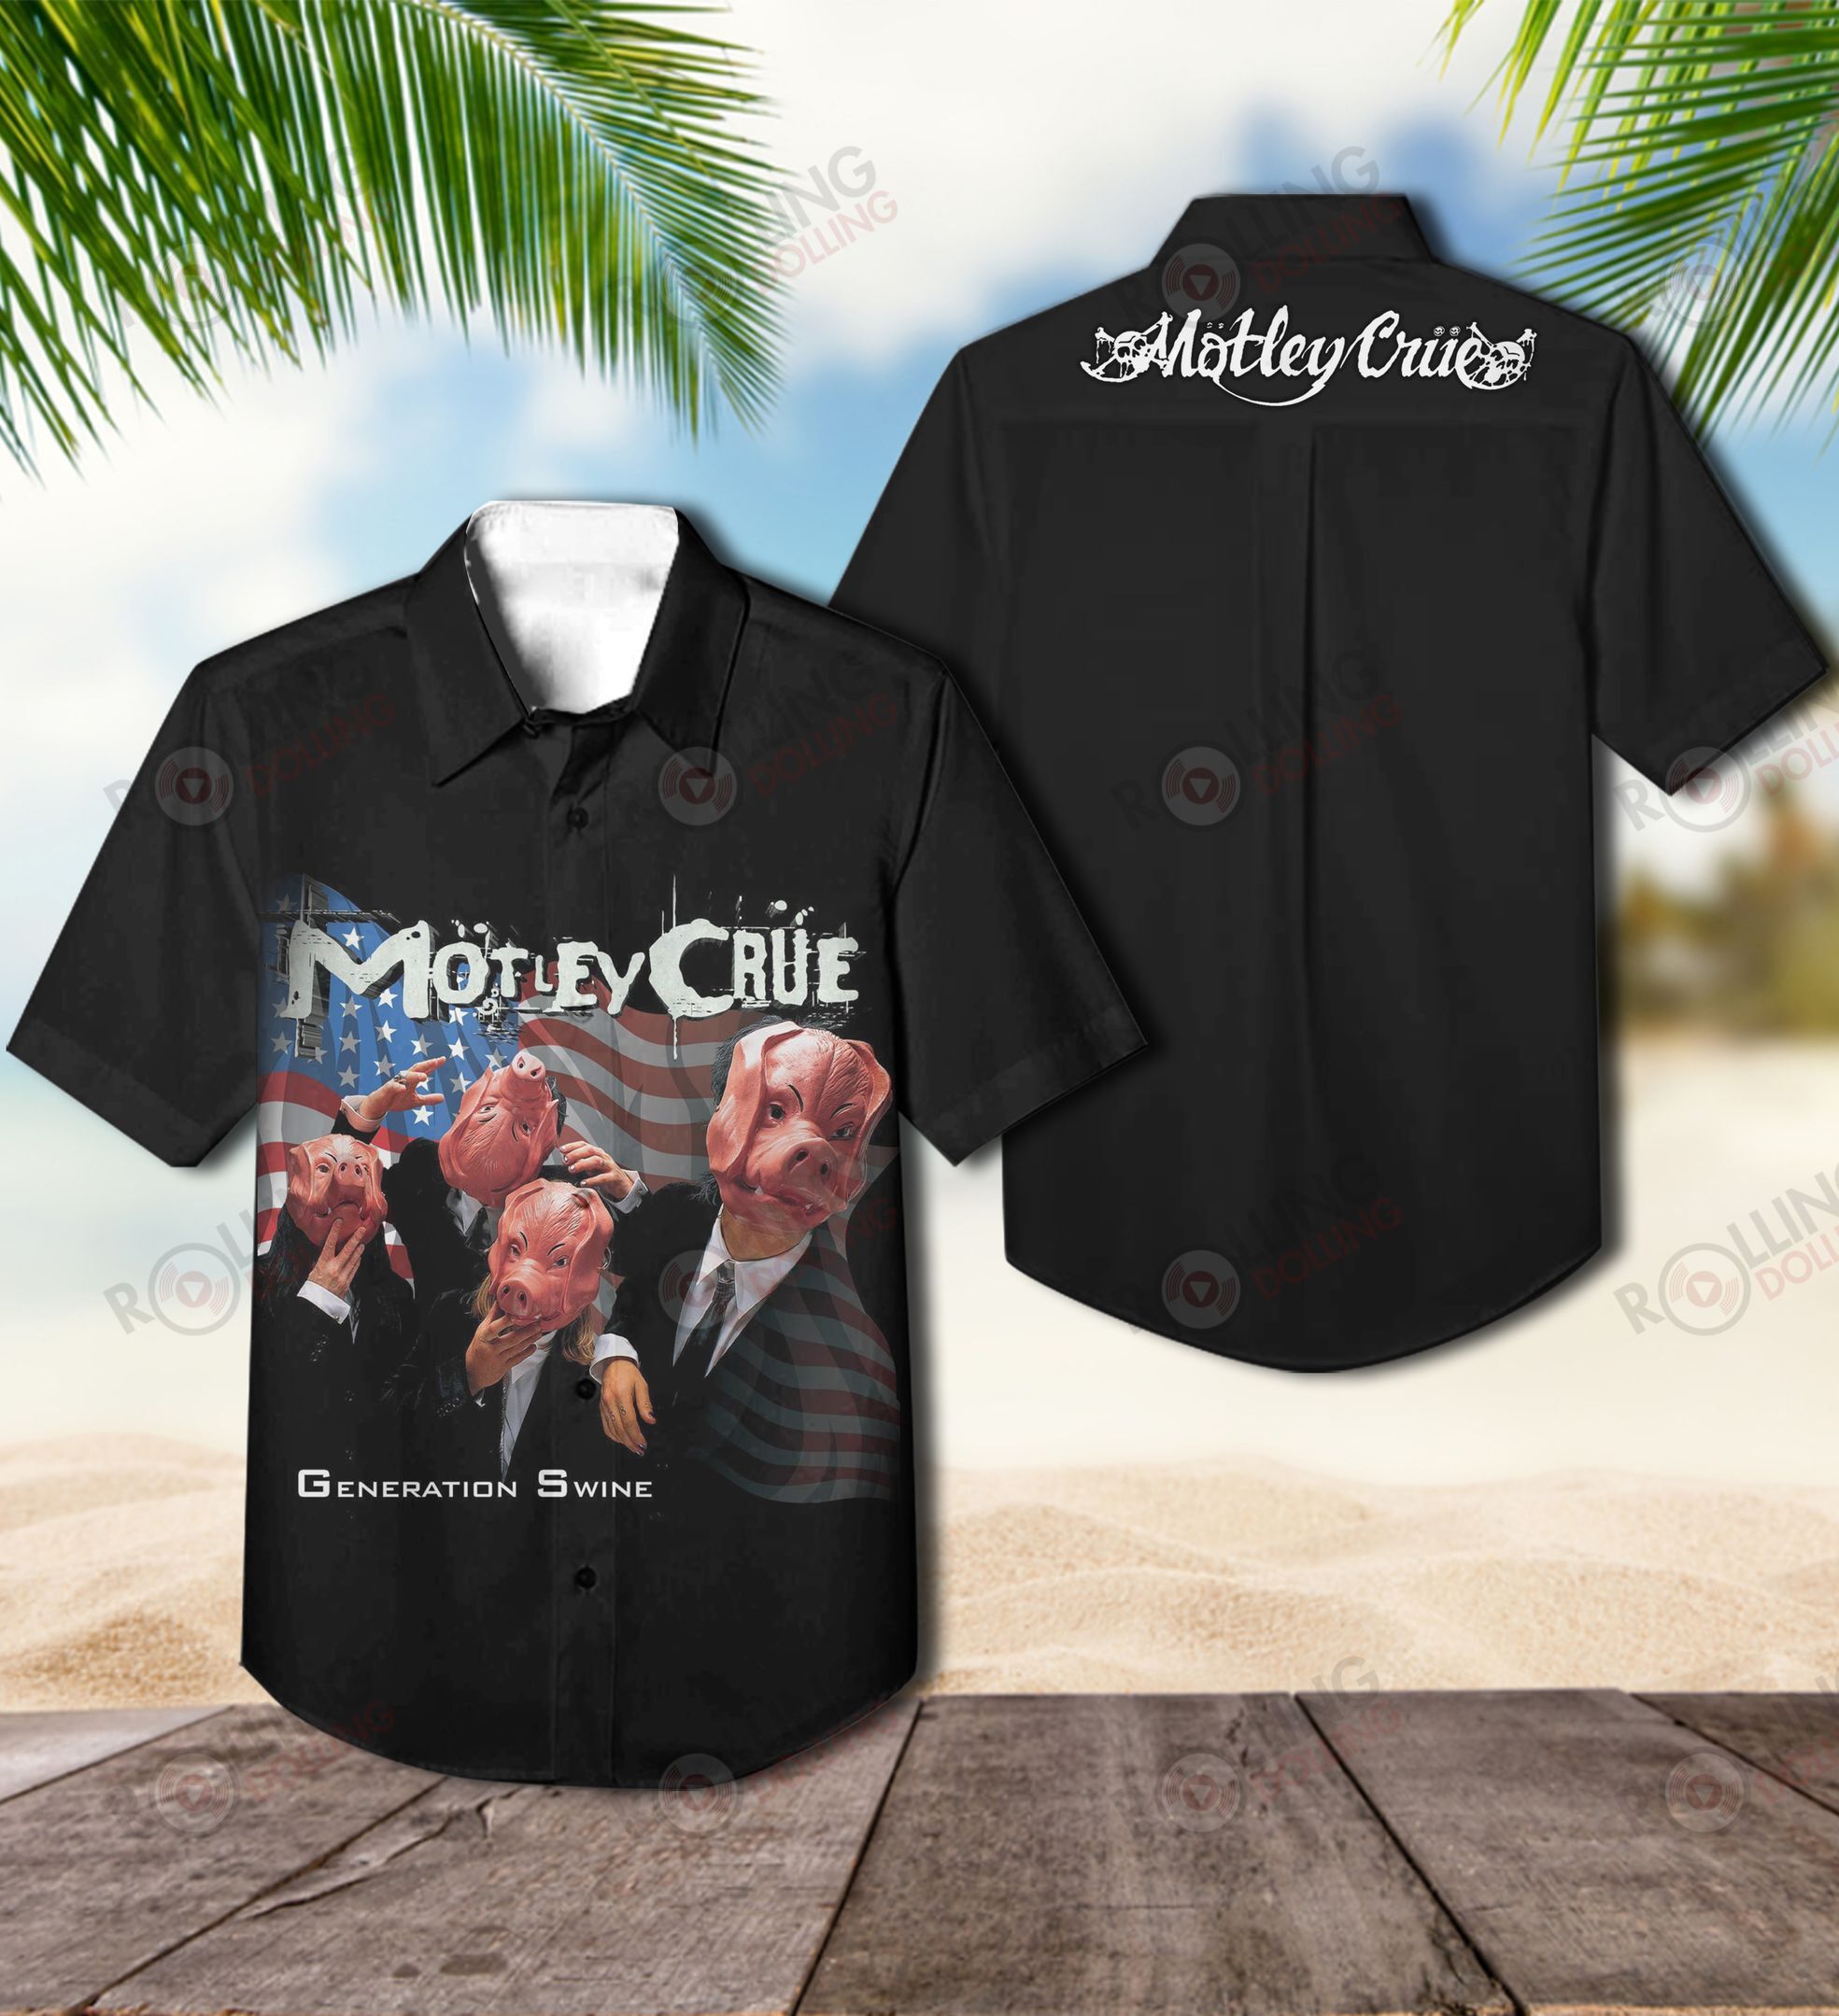 This would make a great gift for any fan who loves Hawaiian Shirt as well as Rock band 92